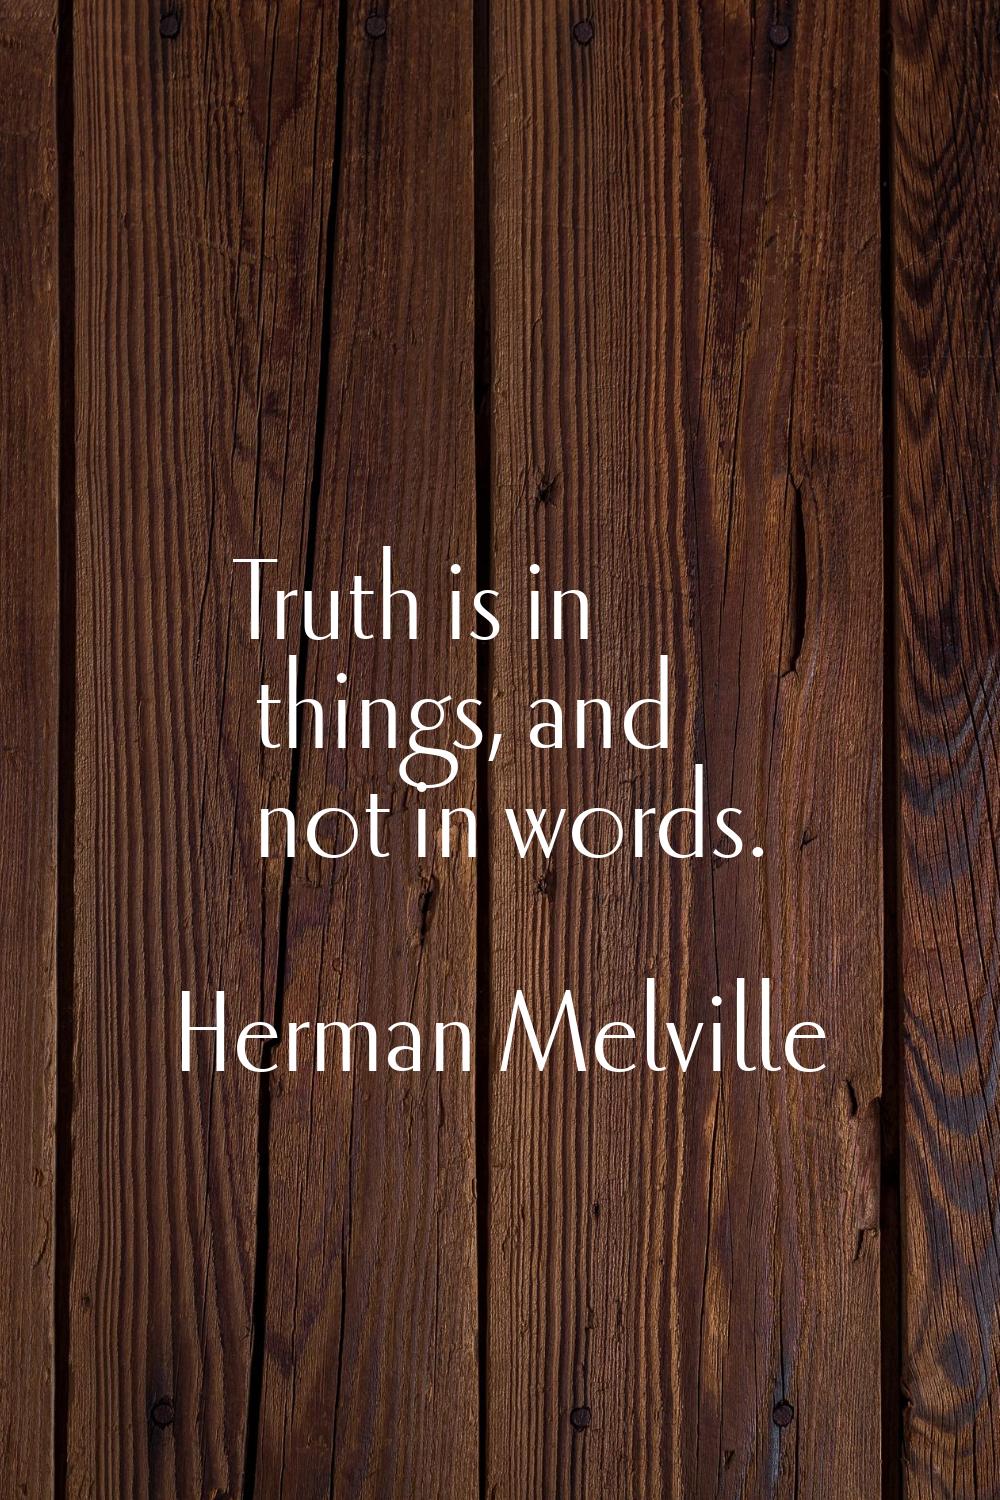 Truth is in things, and not in words.